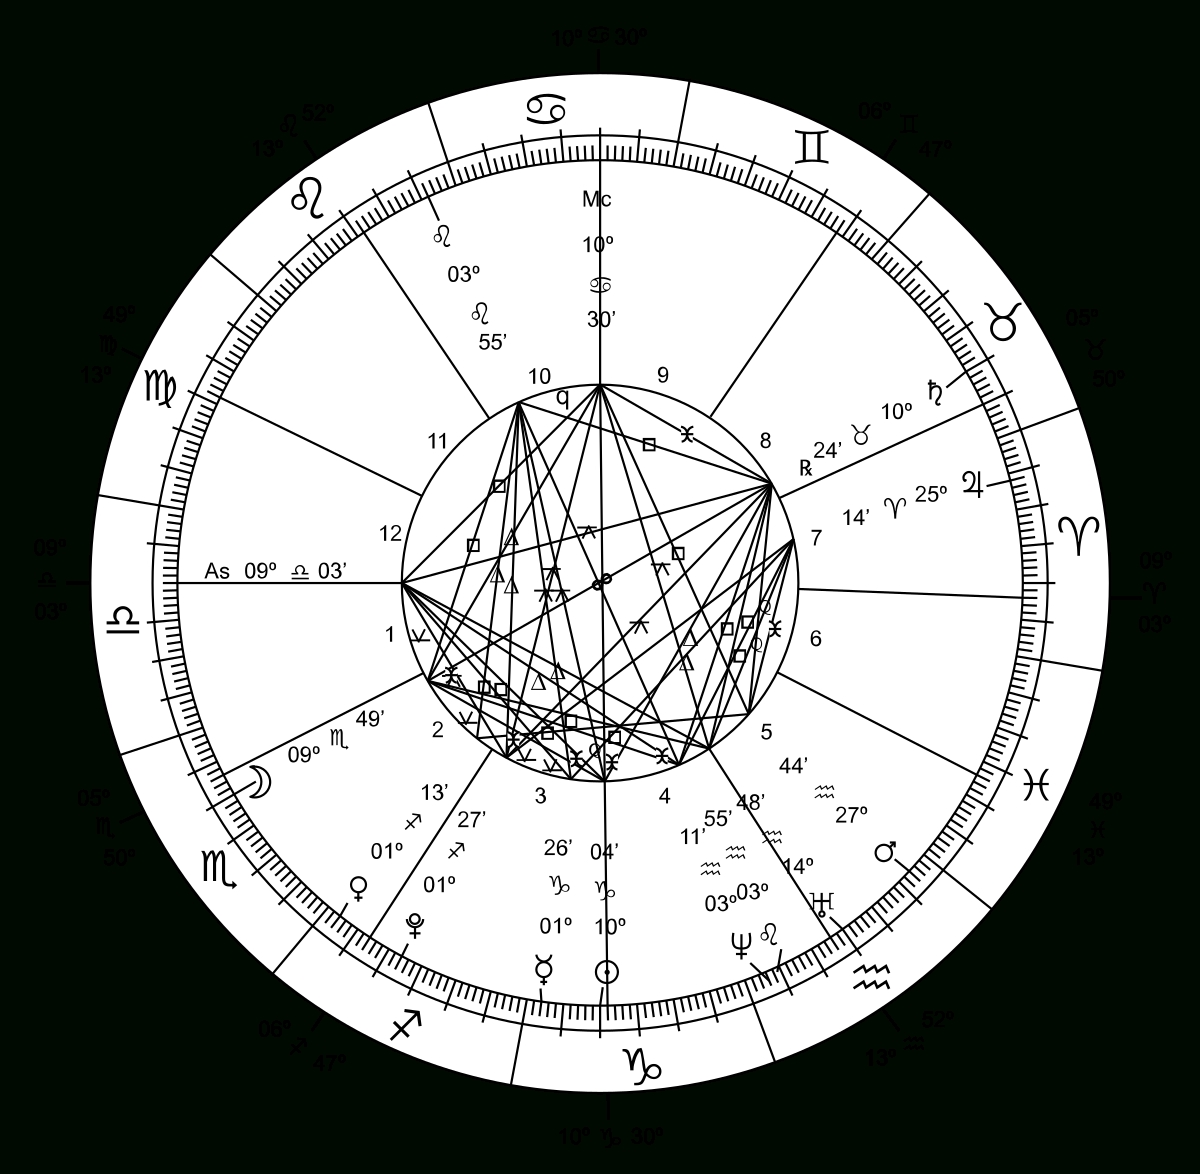 Hellenistic Astrology - Wikipedia